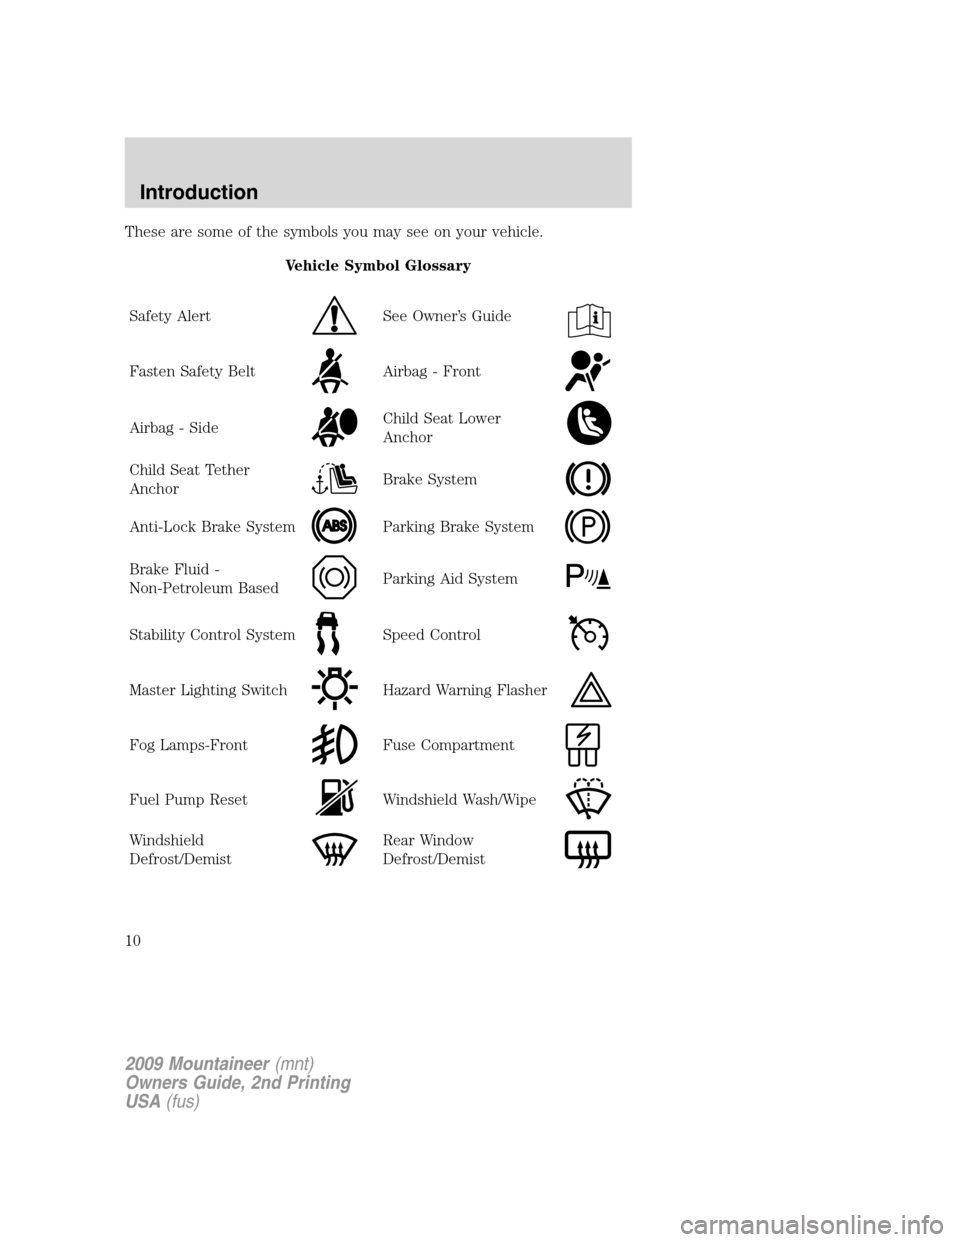 Mercury Mountaineer 2009  Owners Manuals These are some of the symbols you may see on your vehicle.
Vehicle Symbol Glossary
Safety Alert
See Owner’s Guide
Fasten Safety BeltAirbag - Front
Airbag - SideChild Seat Lower
Anchor
Child Seat Tet